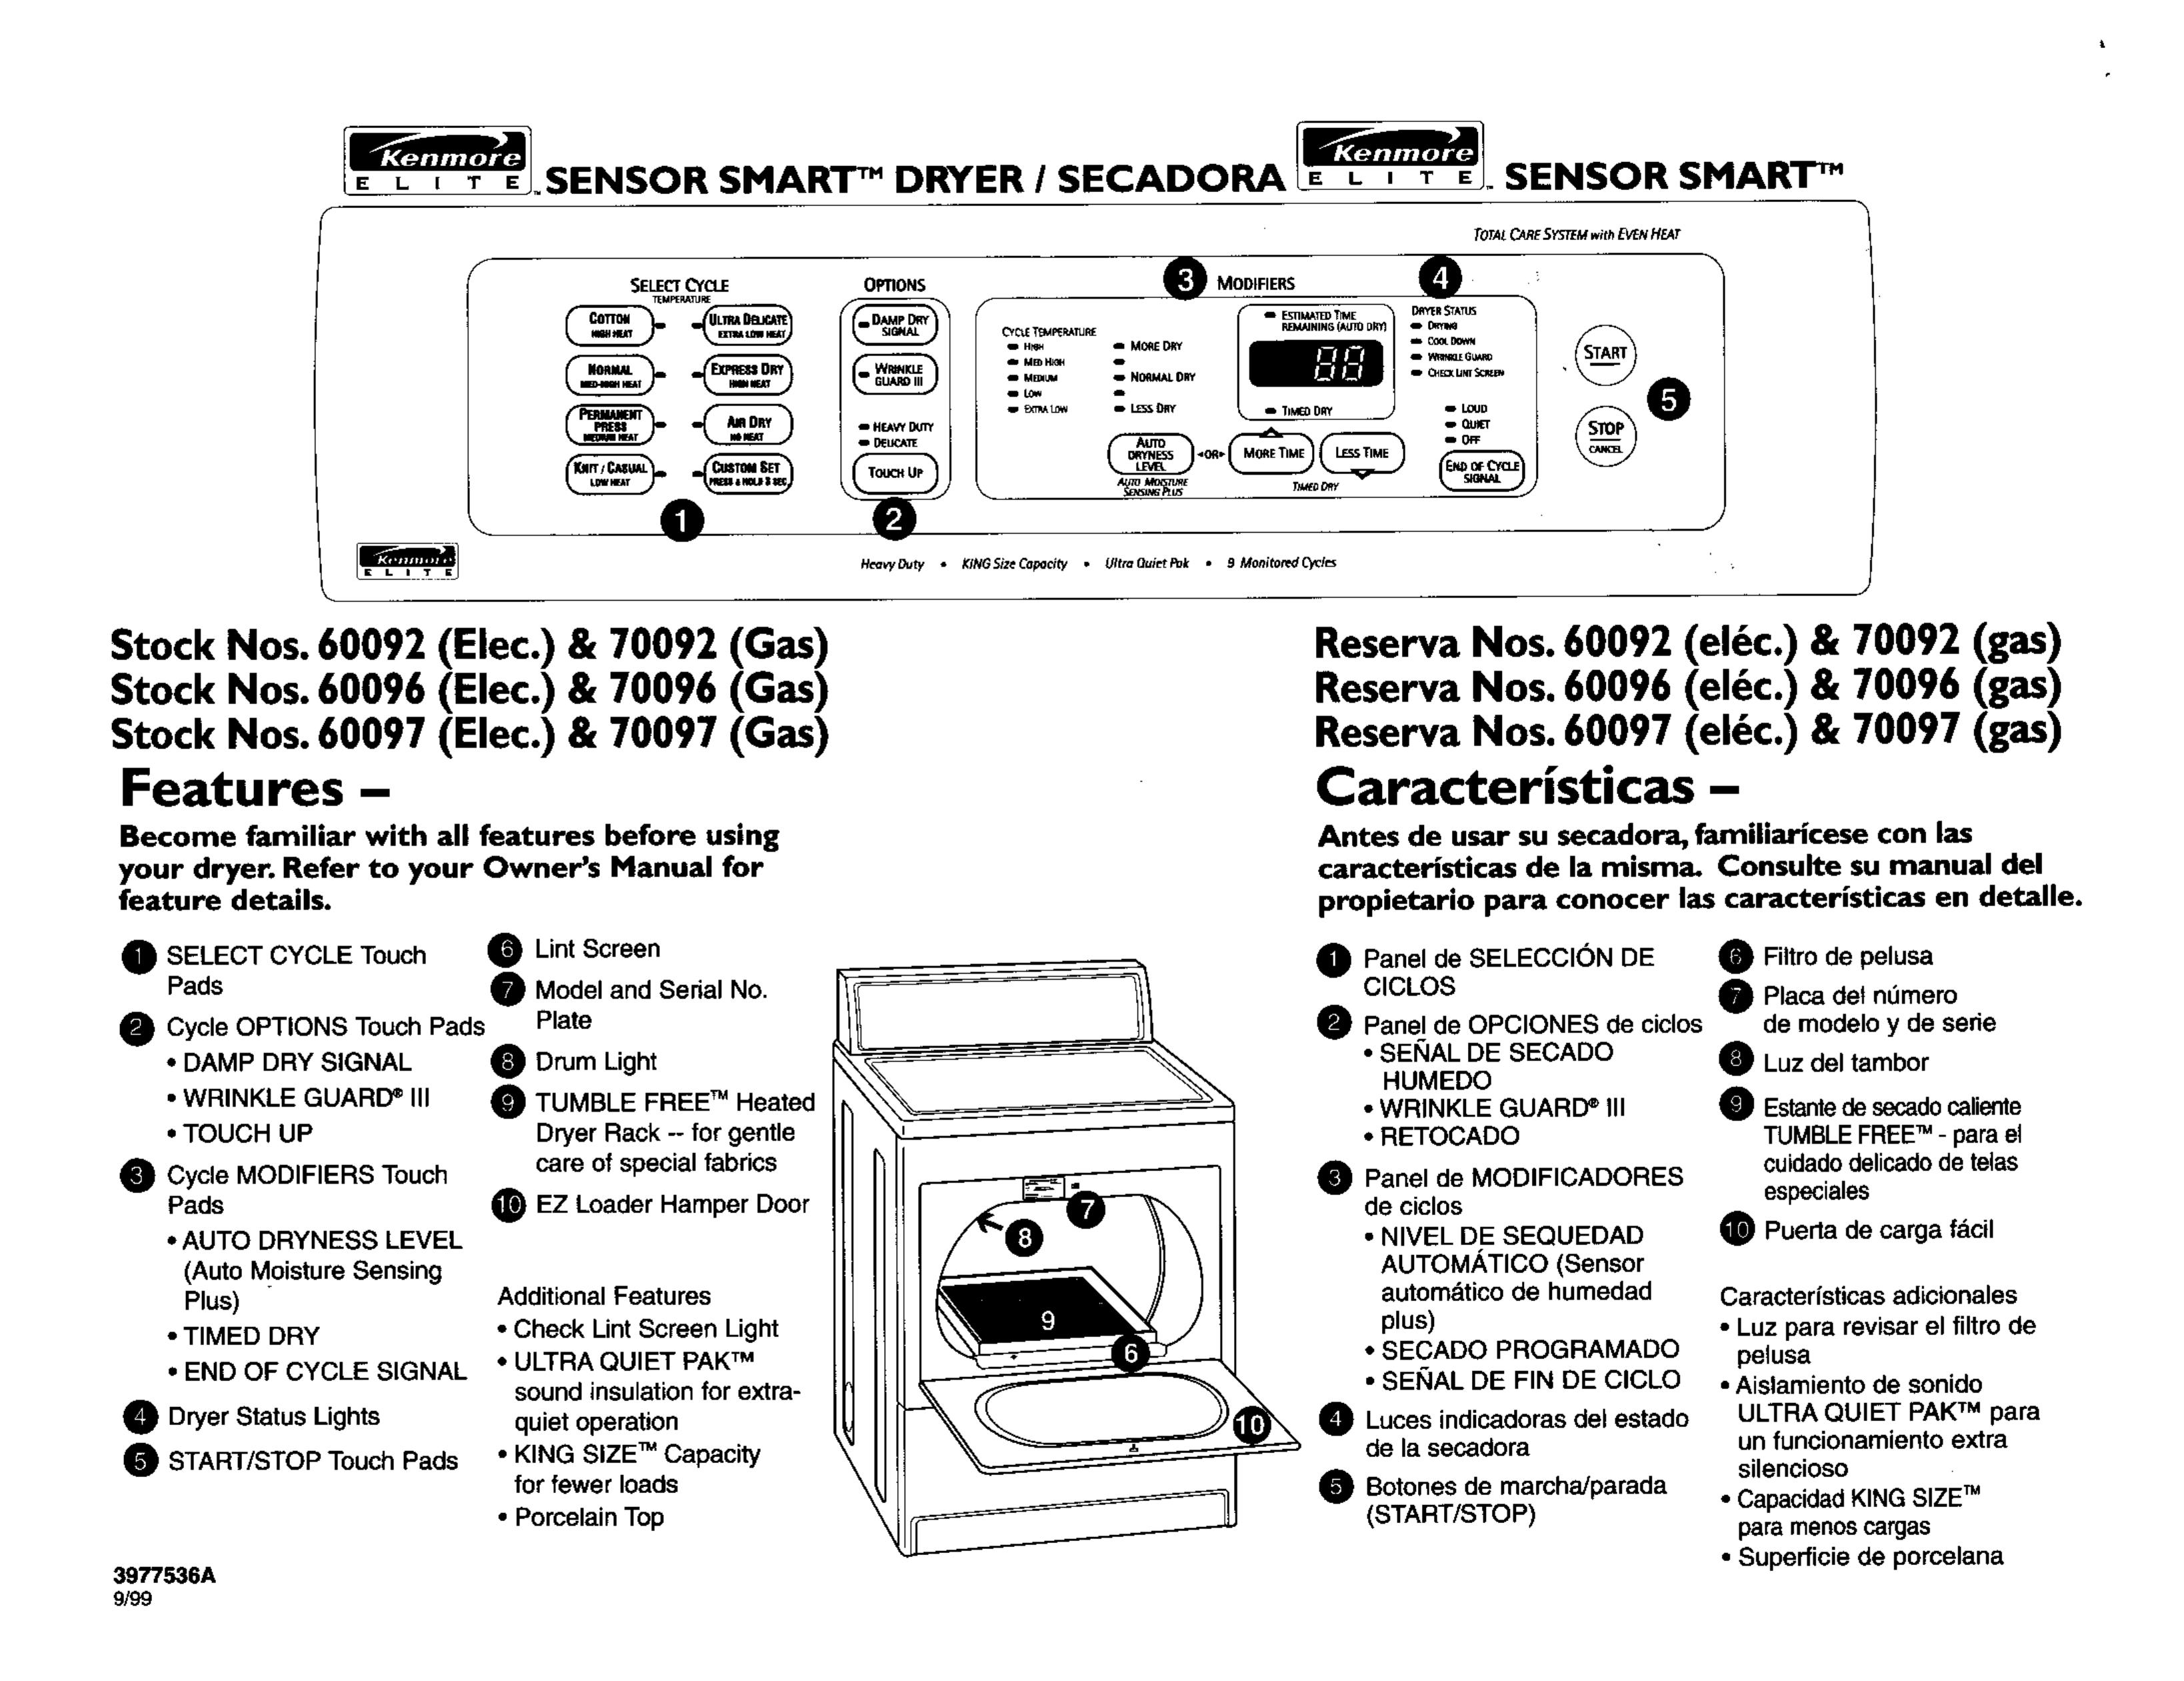 Kenmore 70096 Clothes Dryer User Manual